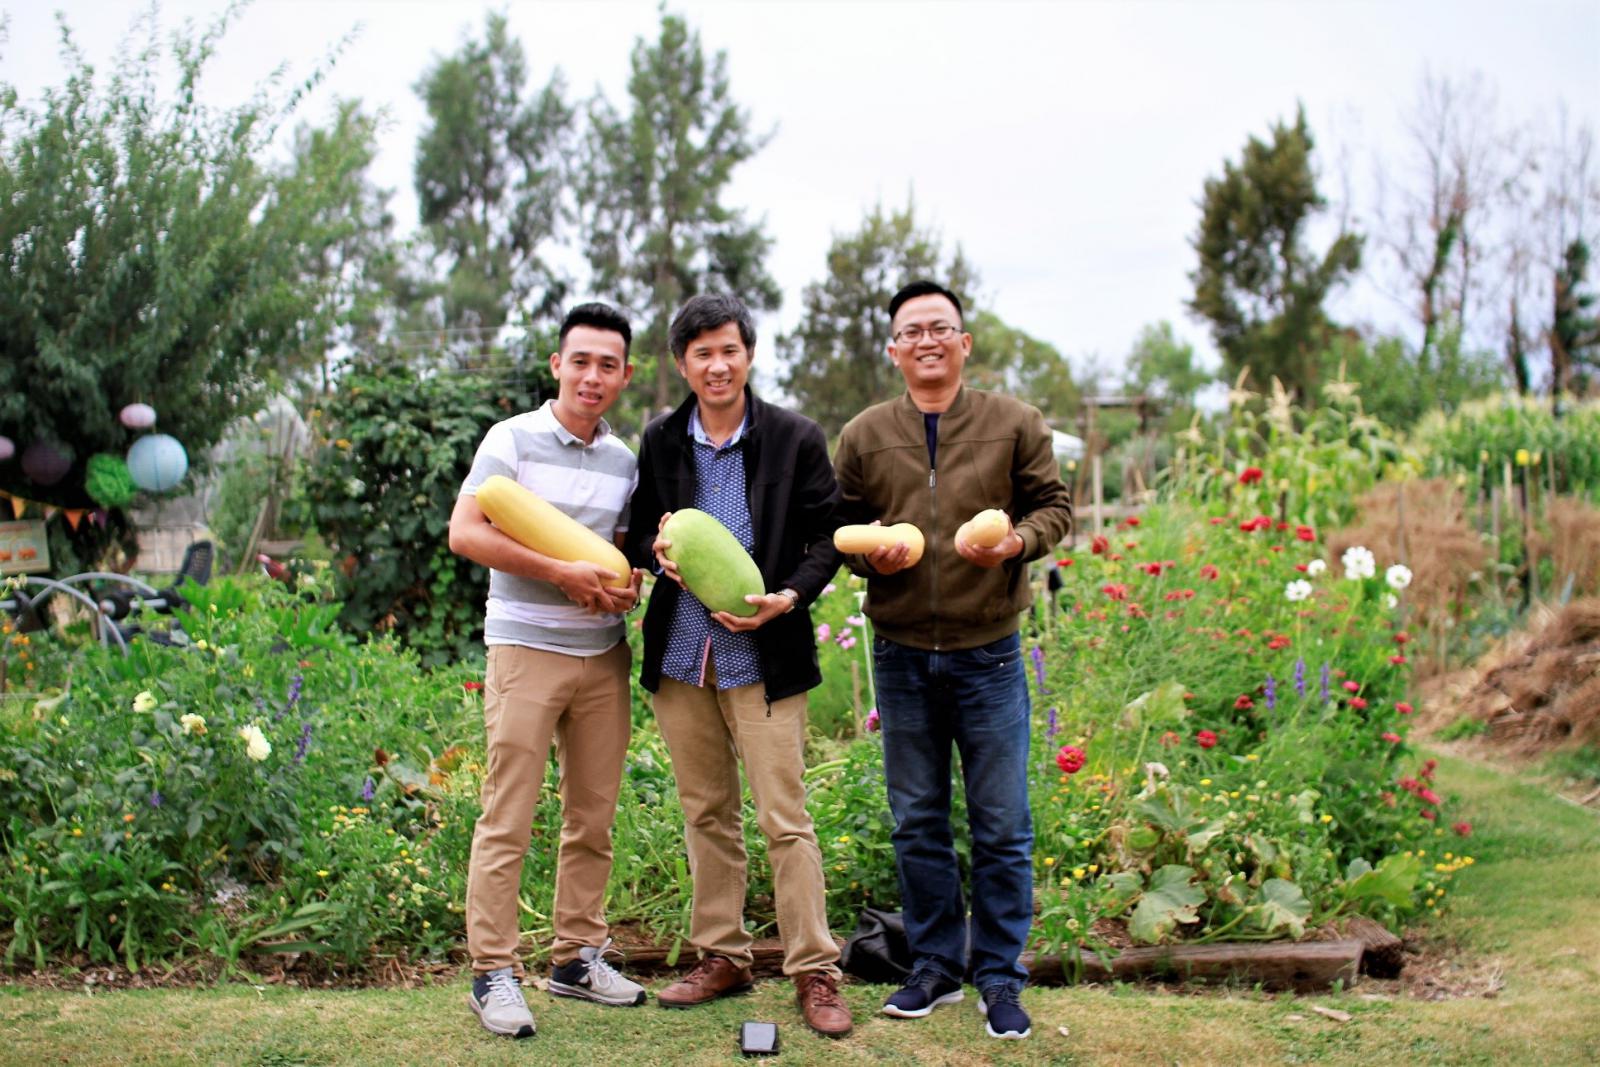 Australian Alumni who initiated and implemented project on “Promoting the Vietnam-Australia partnership in Organic Agriculture Development in An Giang Province” funded by the Australian Alumni Grant Fund (AAGF) from 2018-2019: MSc. Nguyen Van Thai, Dr. Nguyen Van Kien, MSc. Le Ngoc Hiep